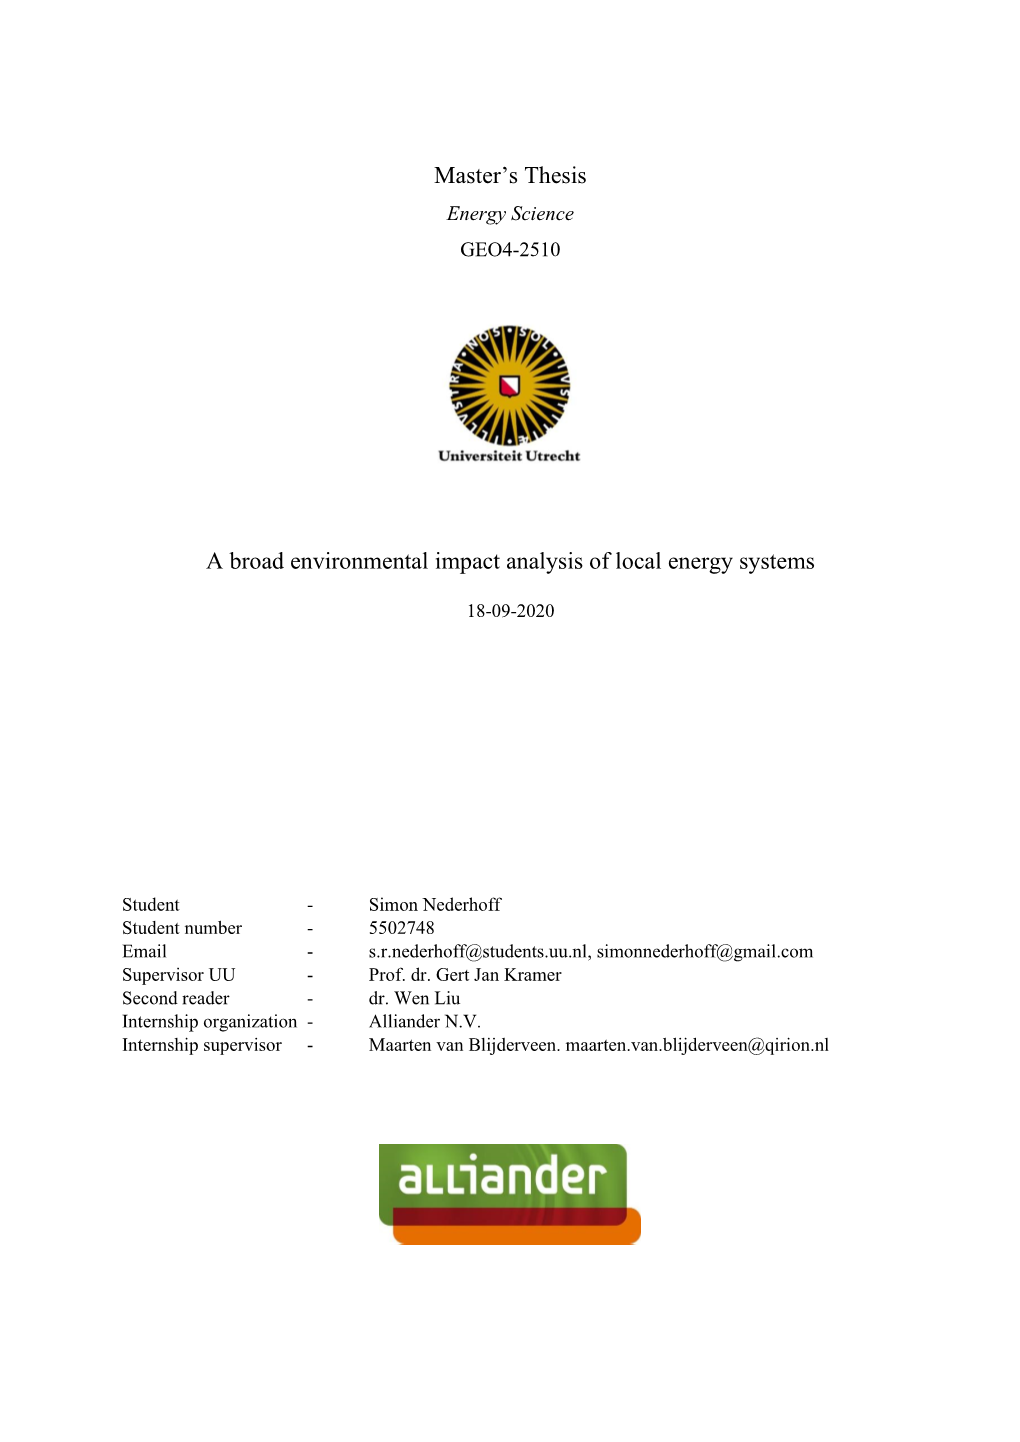 Master's Thesis a Broad Environmental Impact Analysis of Local Energy Systems